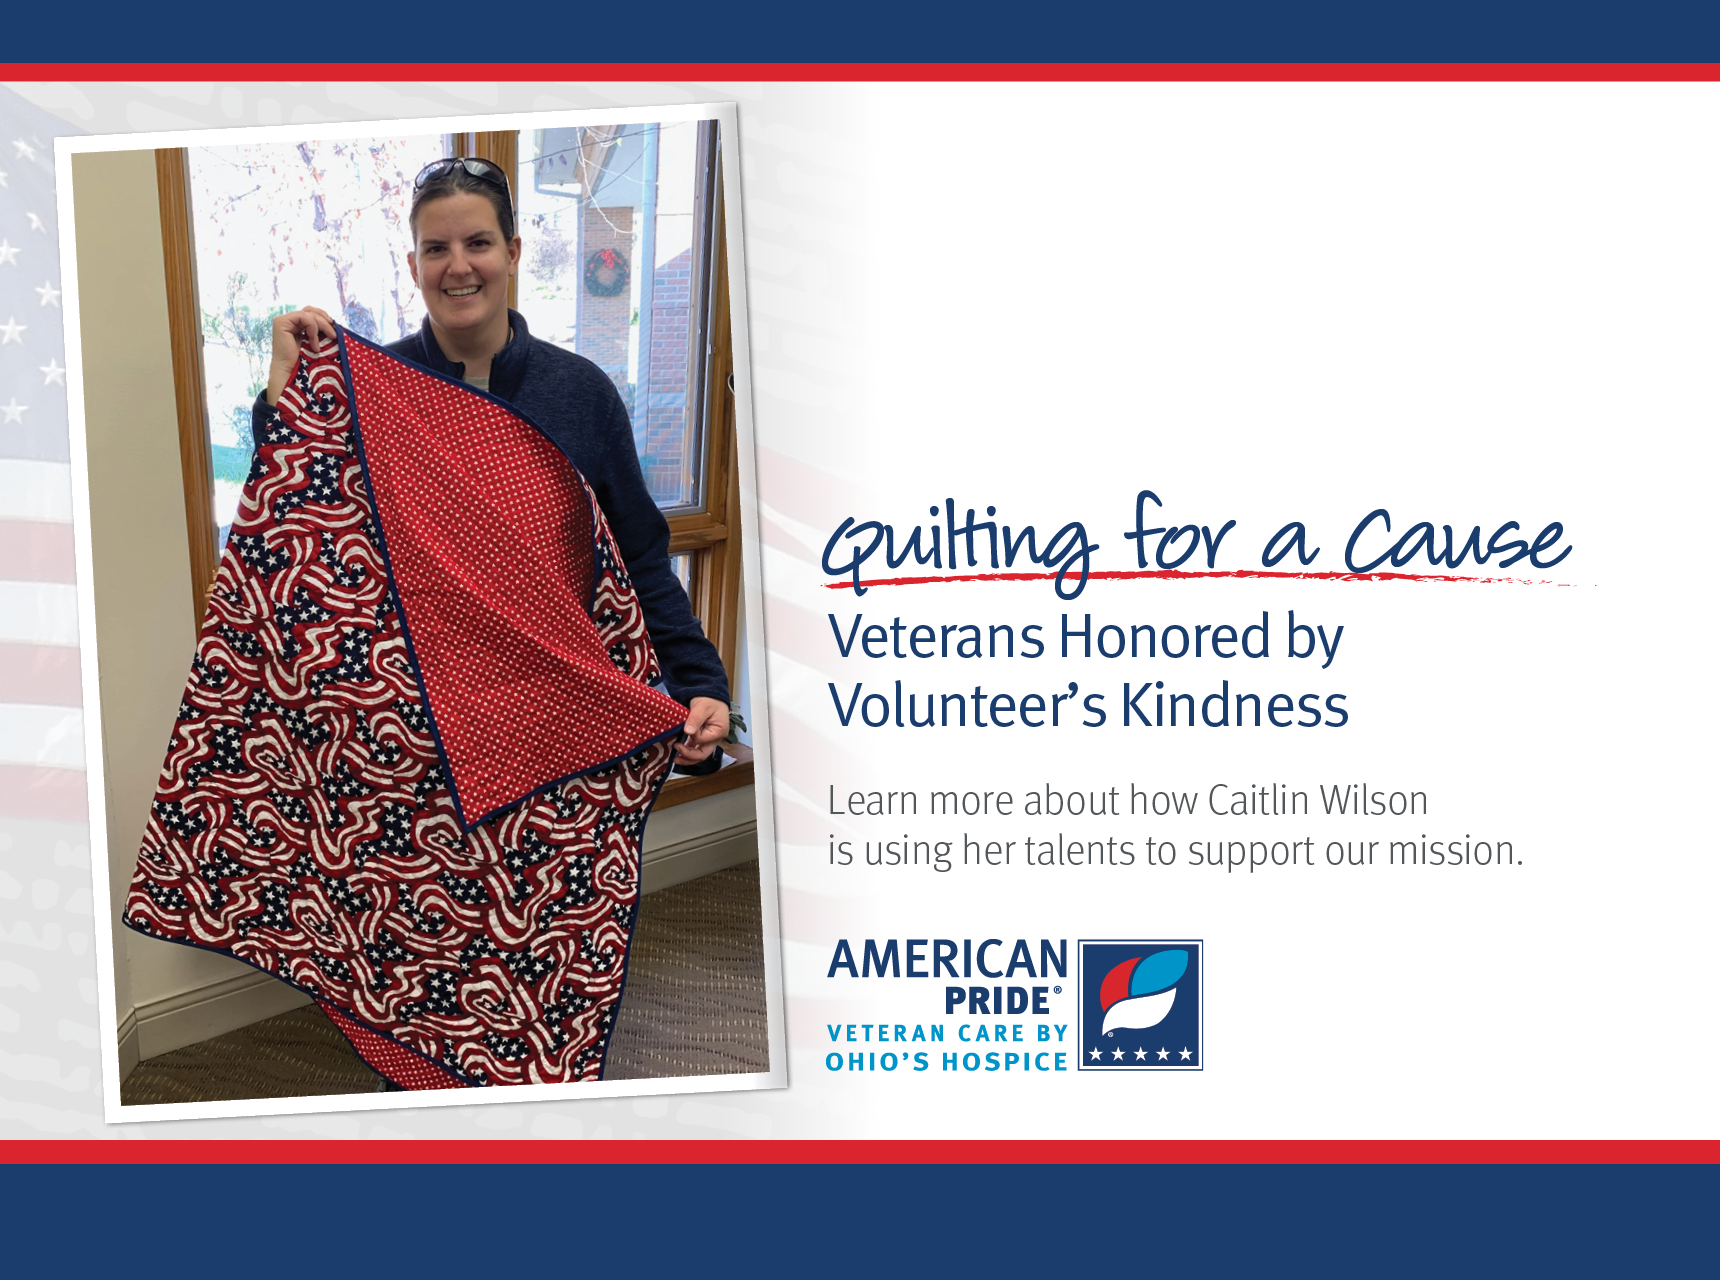 Quilting for a Cause: Veterans Honored by Volunteer's Kindness: Learn more about how Caitlin Wilson is using her talents to support our mission.